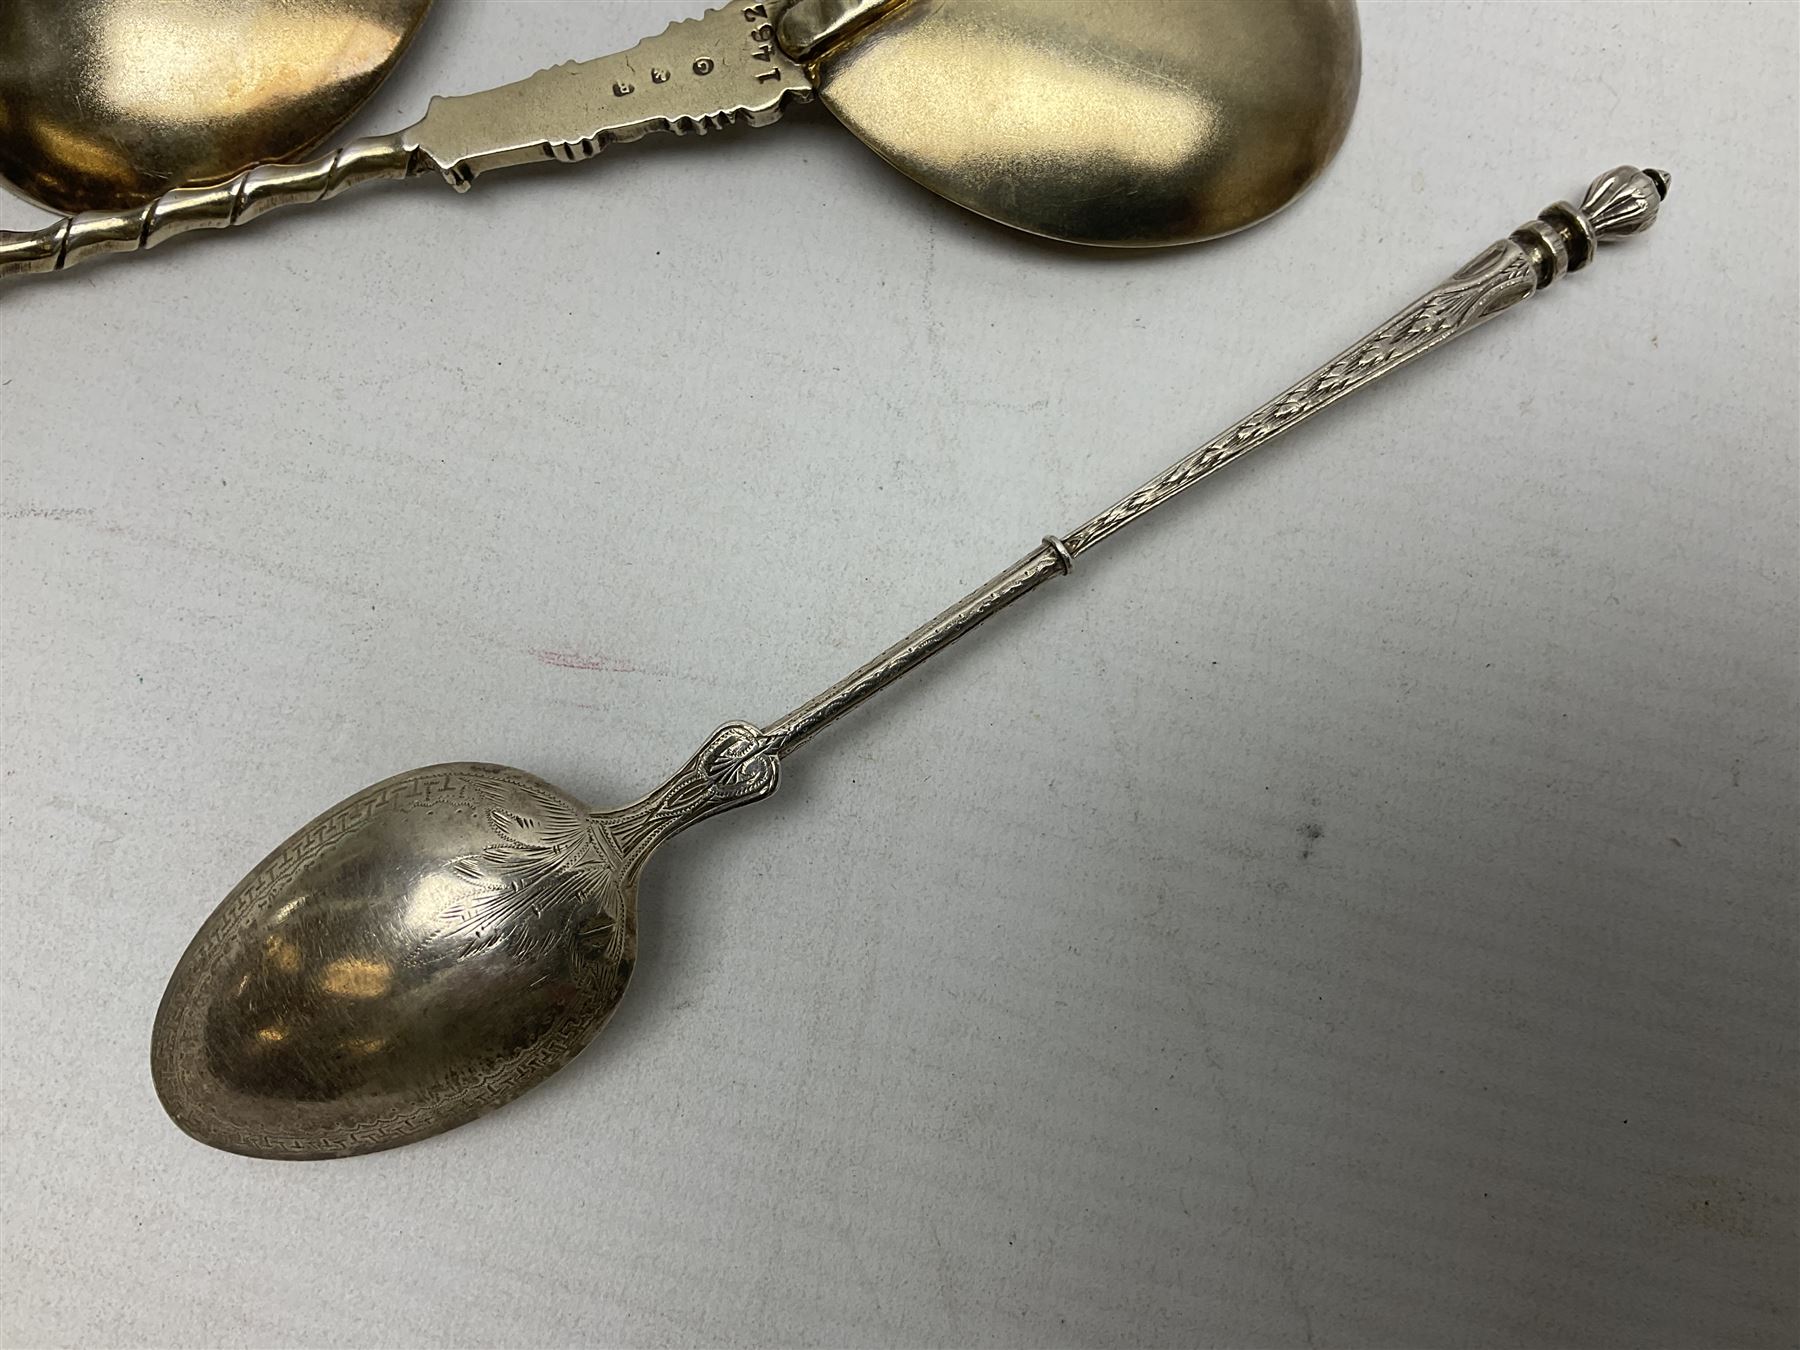 Silver spoon with elongated stem and engraved detail - Image 5 of 5